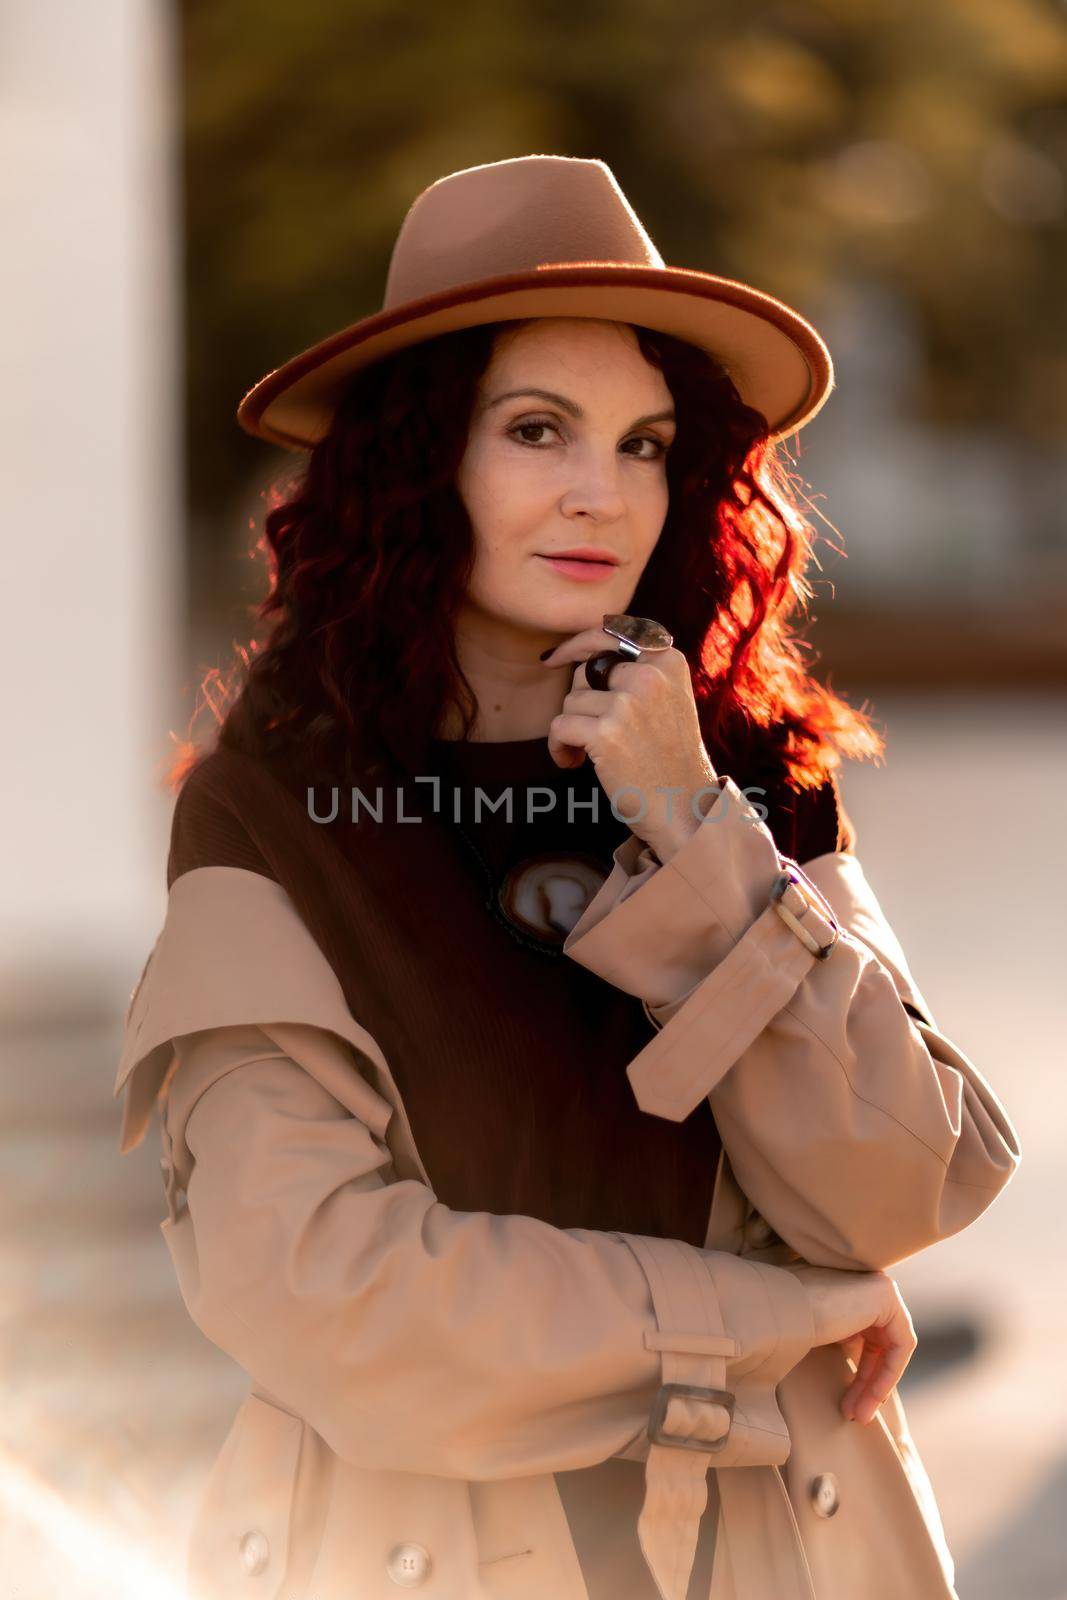 Outdoor fashion portrait of young elegant fashionable brunette woman, model in stylish hat, choker and light raincoat posing at sunset in European city